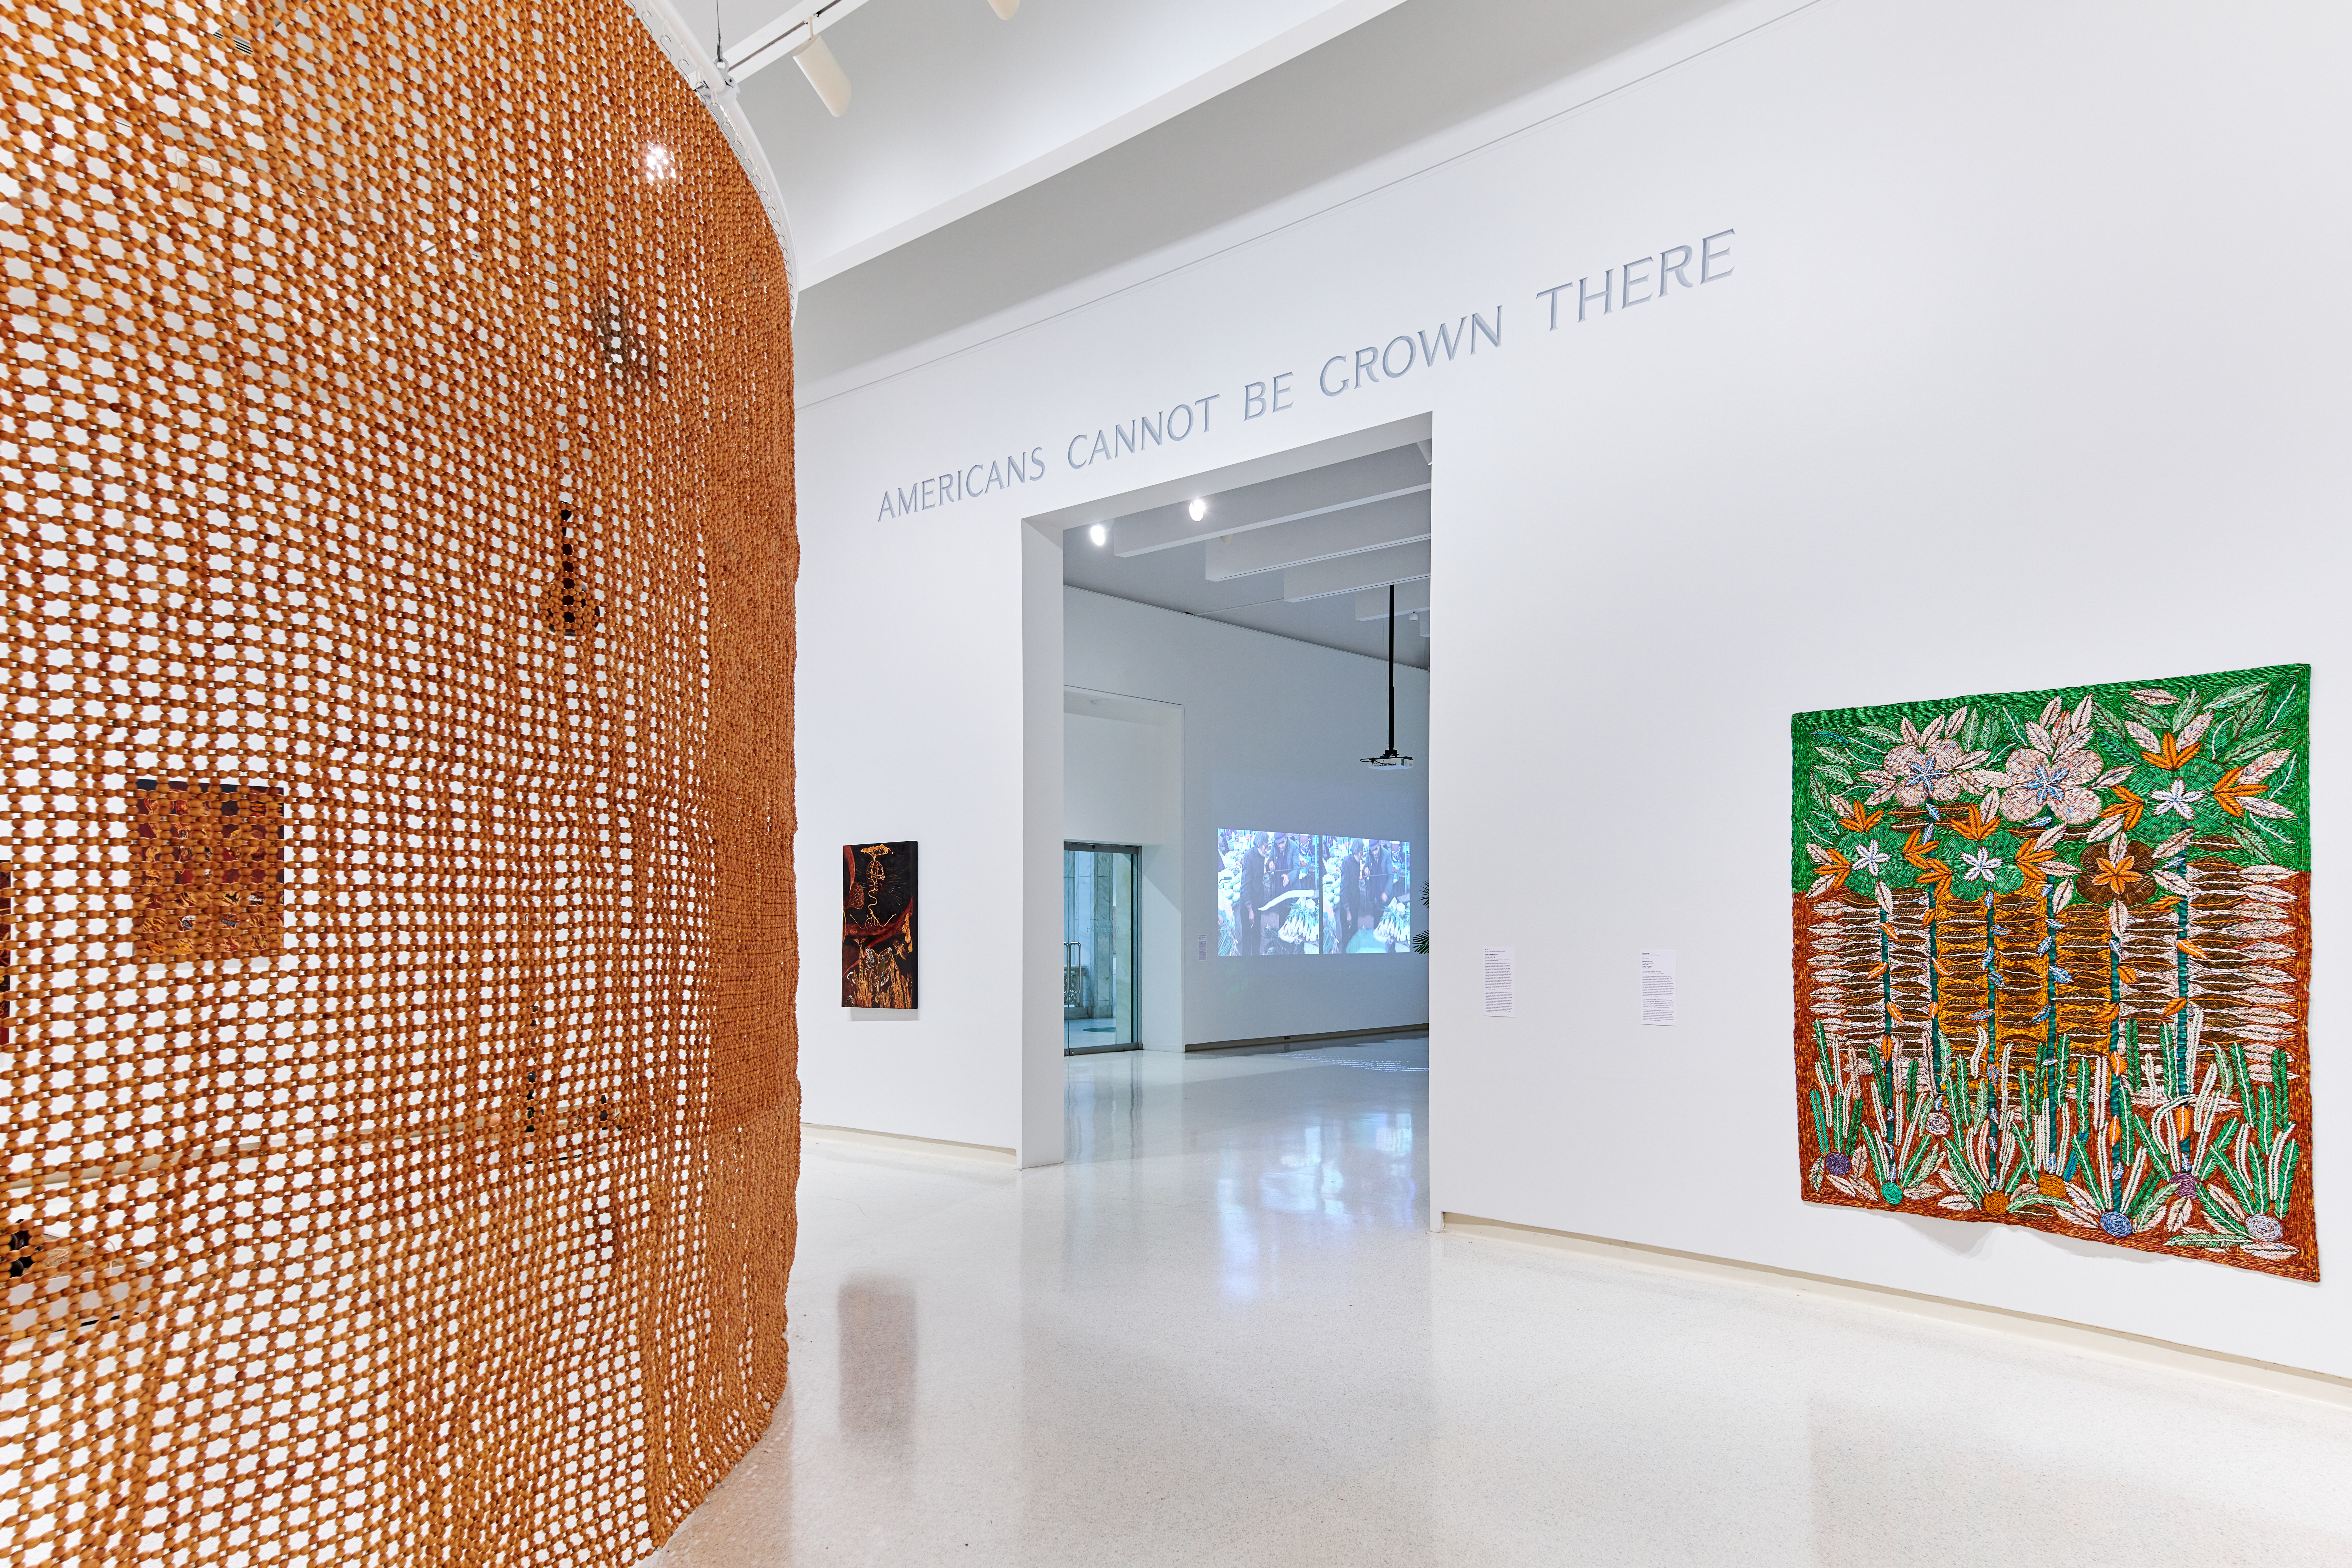 Installation view of the 58th Carnegie International featuring works by Trương Công Tùng, Pio Abad, and Sanaa Gateja